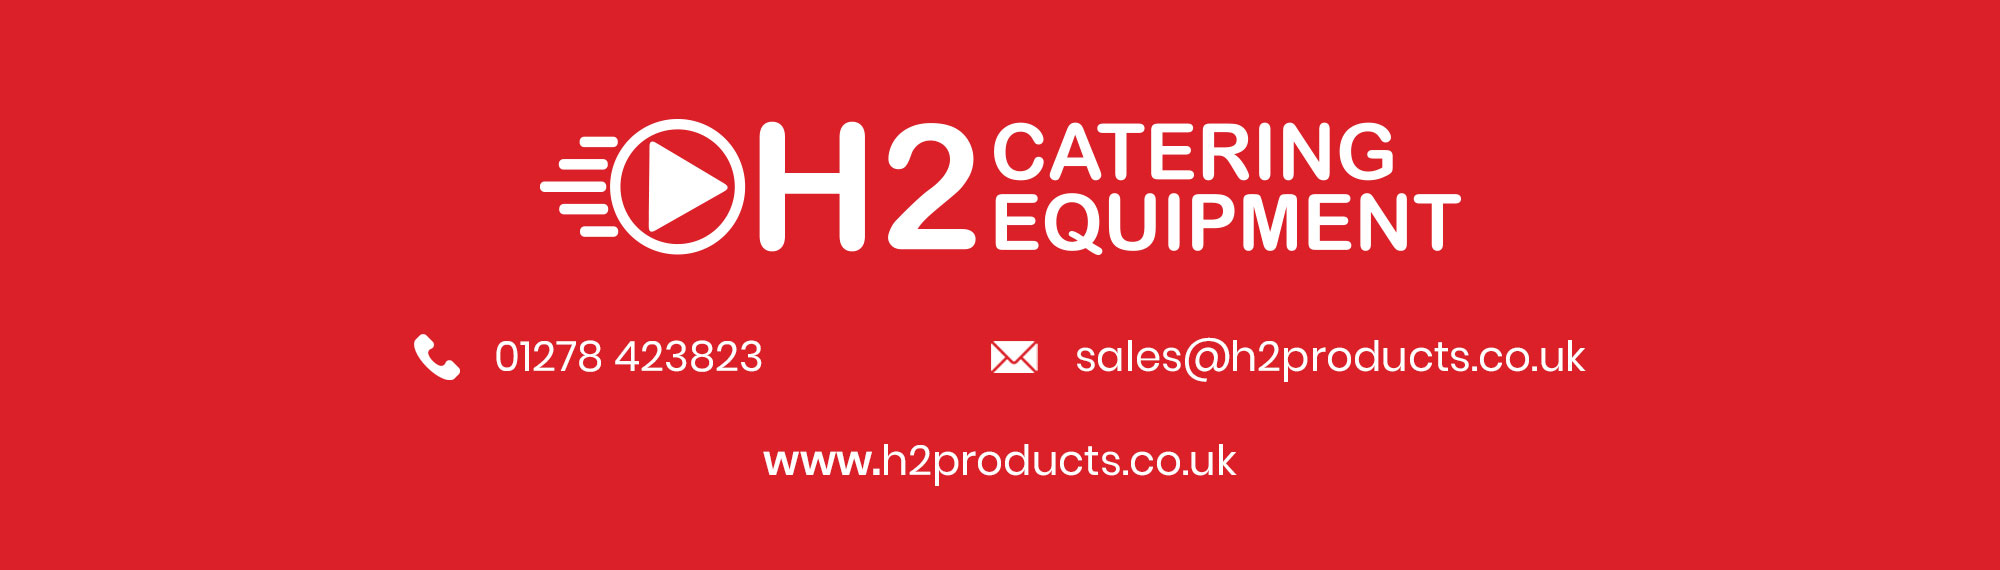 H2 Products